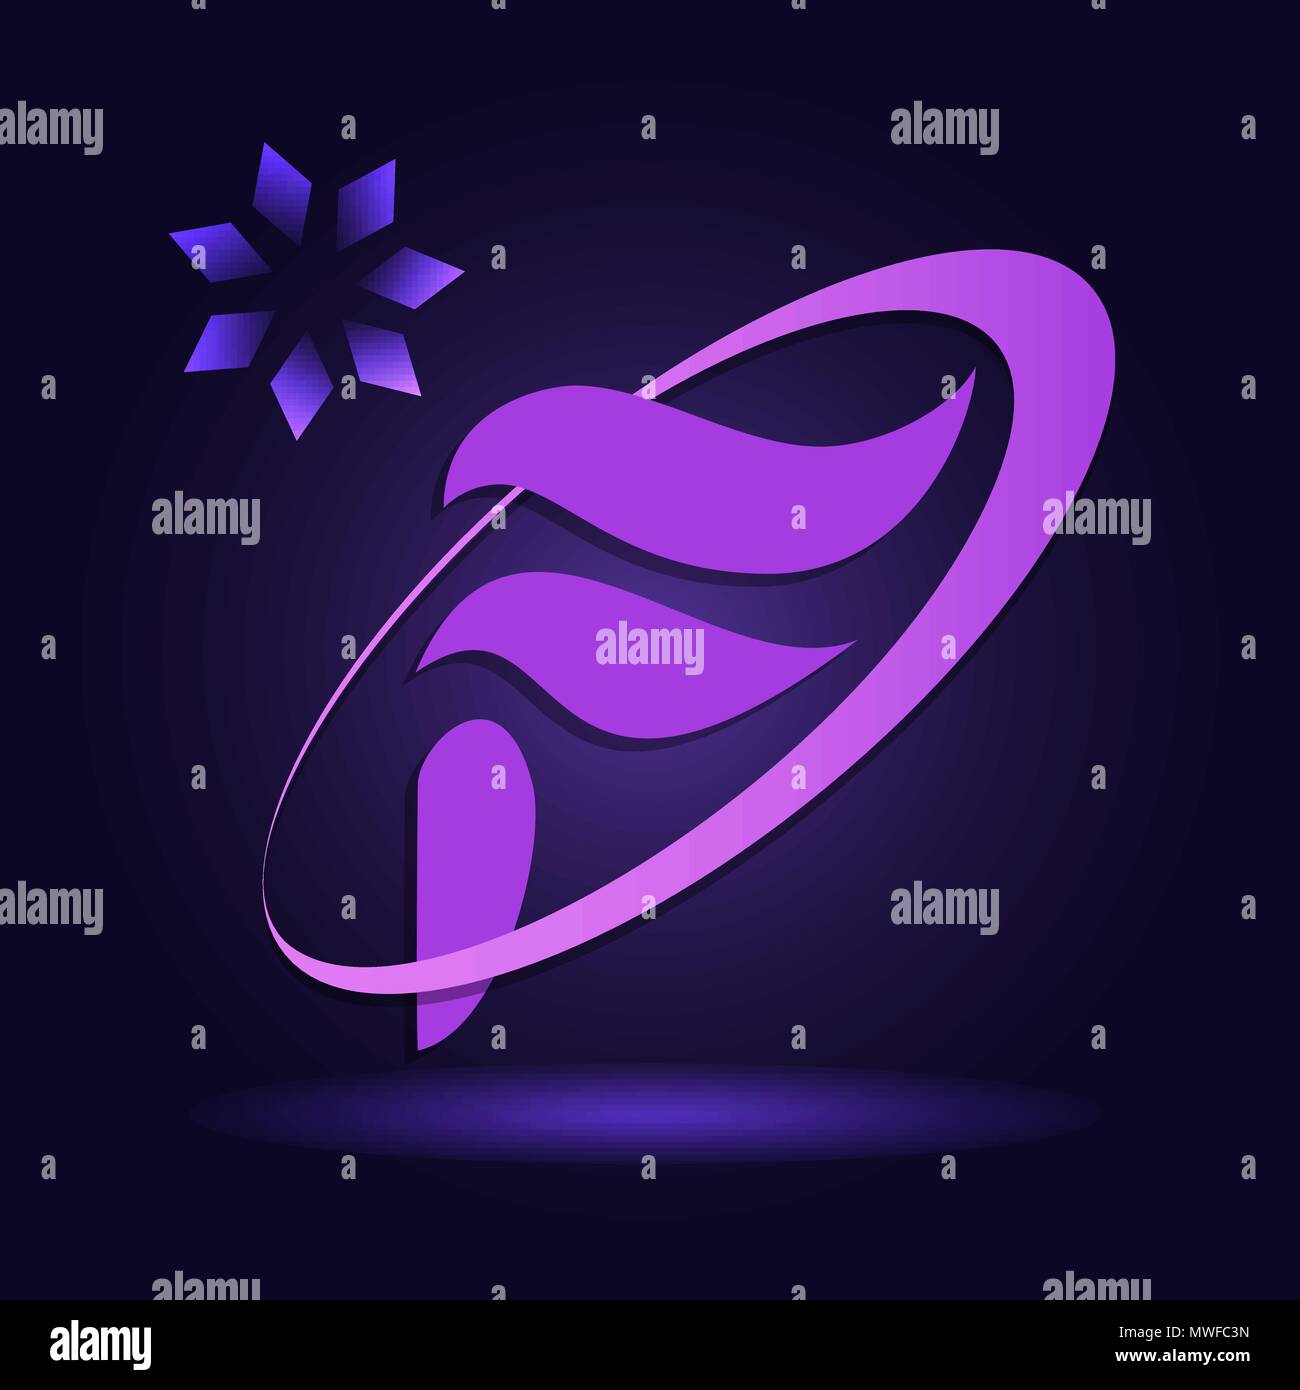 F capital letter abstract logo design with ornaments in ultra violet Stock Vector